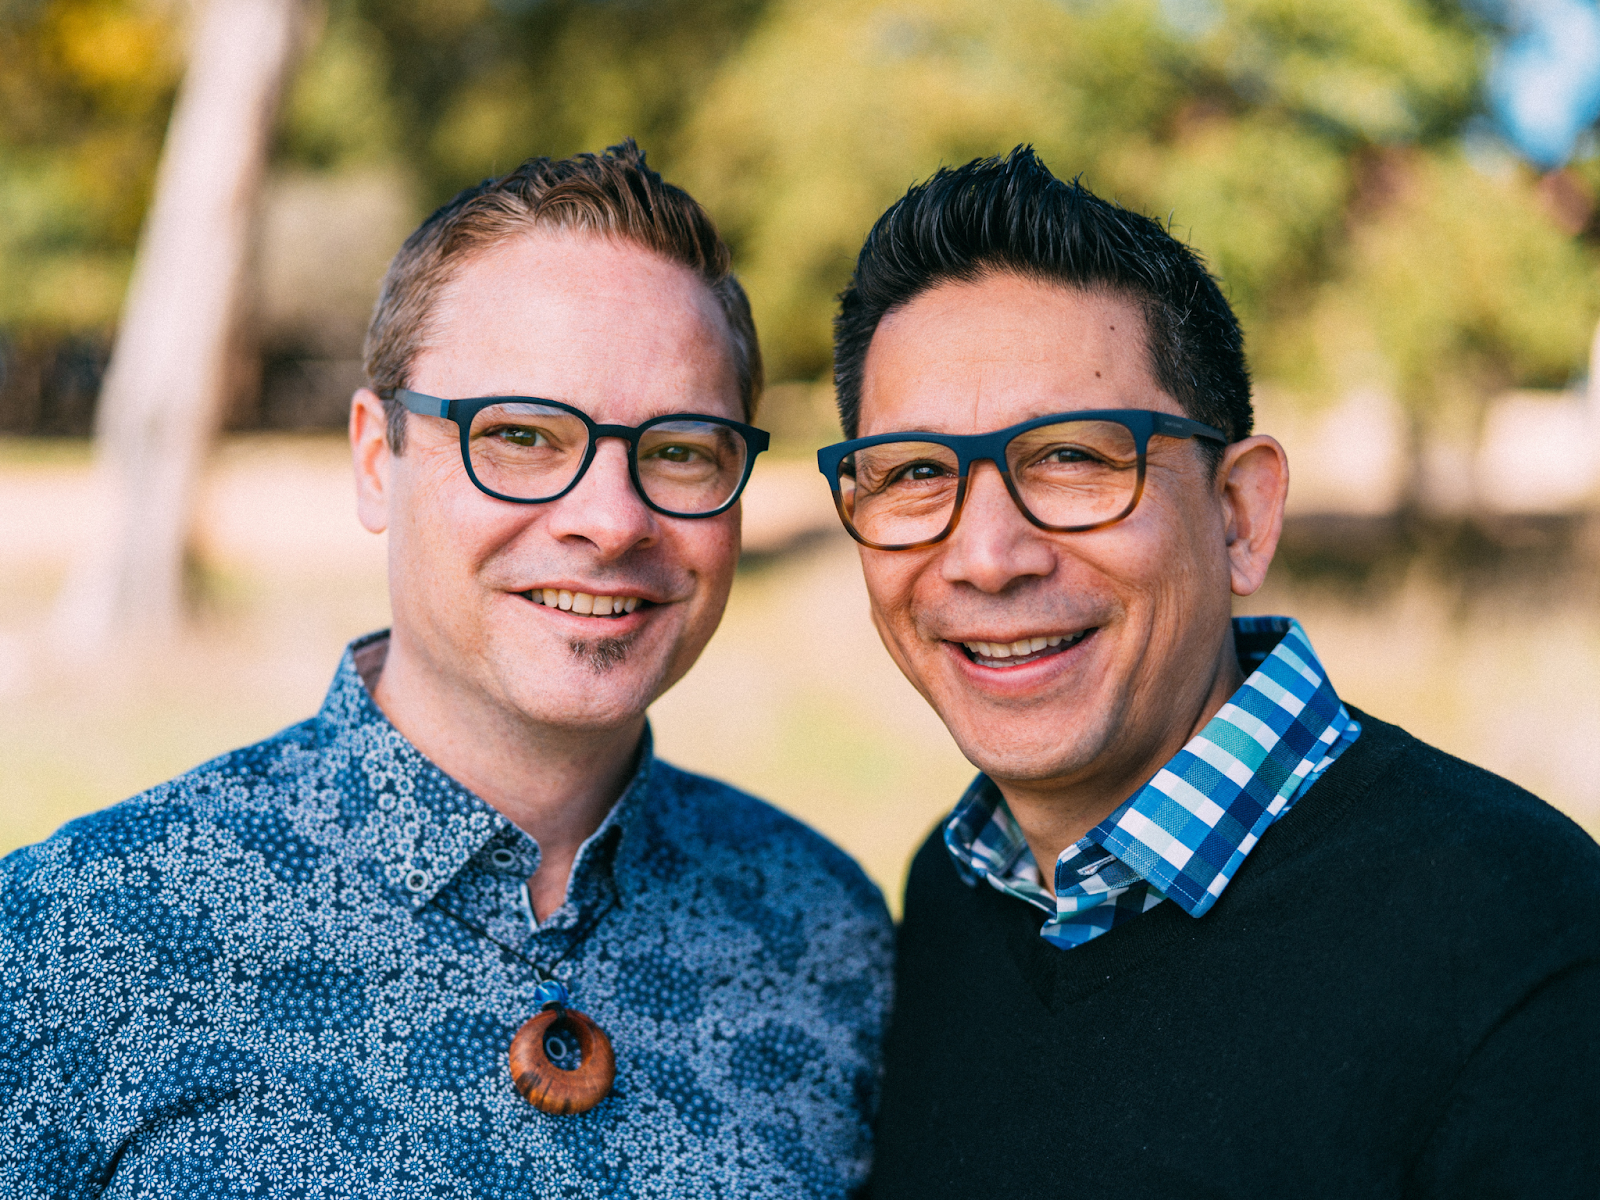 Authors Who Lead was co-founded by Azul Terronez and Steve Vannoy, husbands, business partners, and lead coaches.